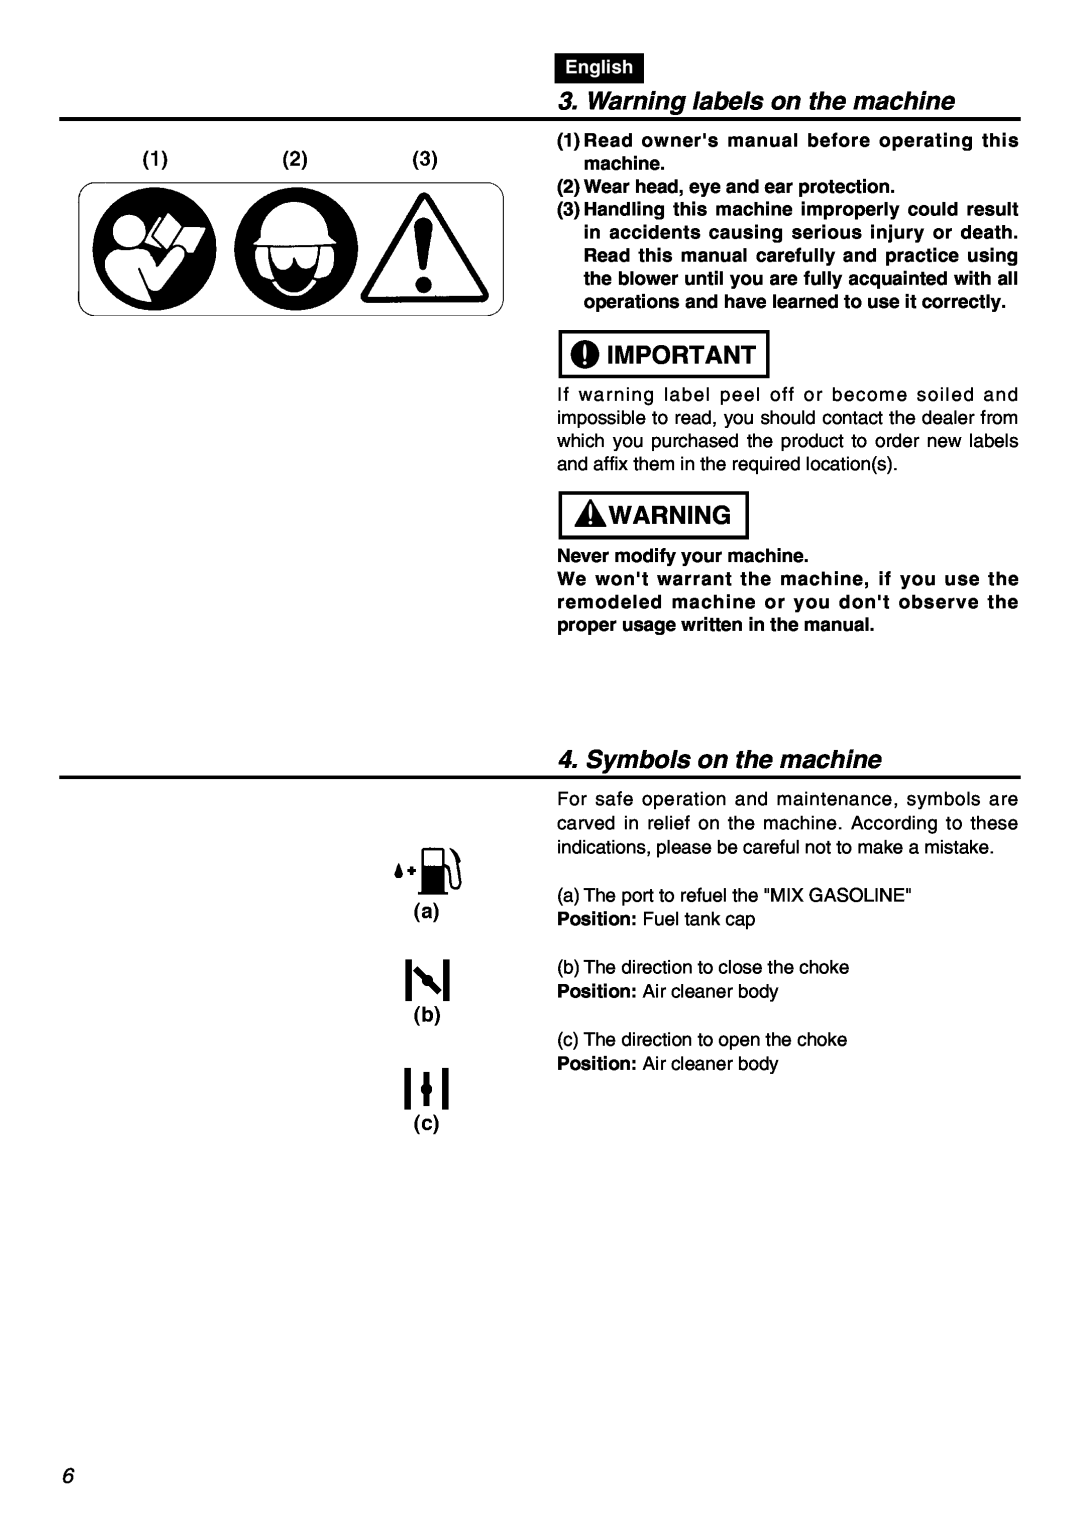 Zenoah HBZ2601-CA manual Warning labels on the machine, Symbols on the machine, English, Wear head, eye and ear protection 